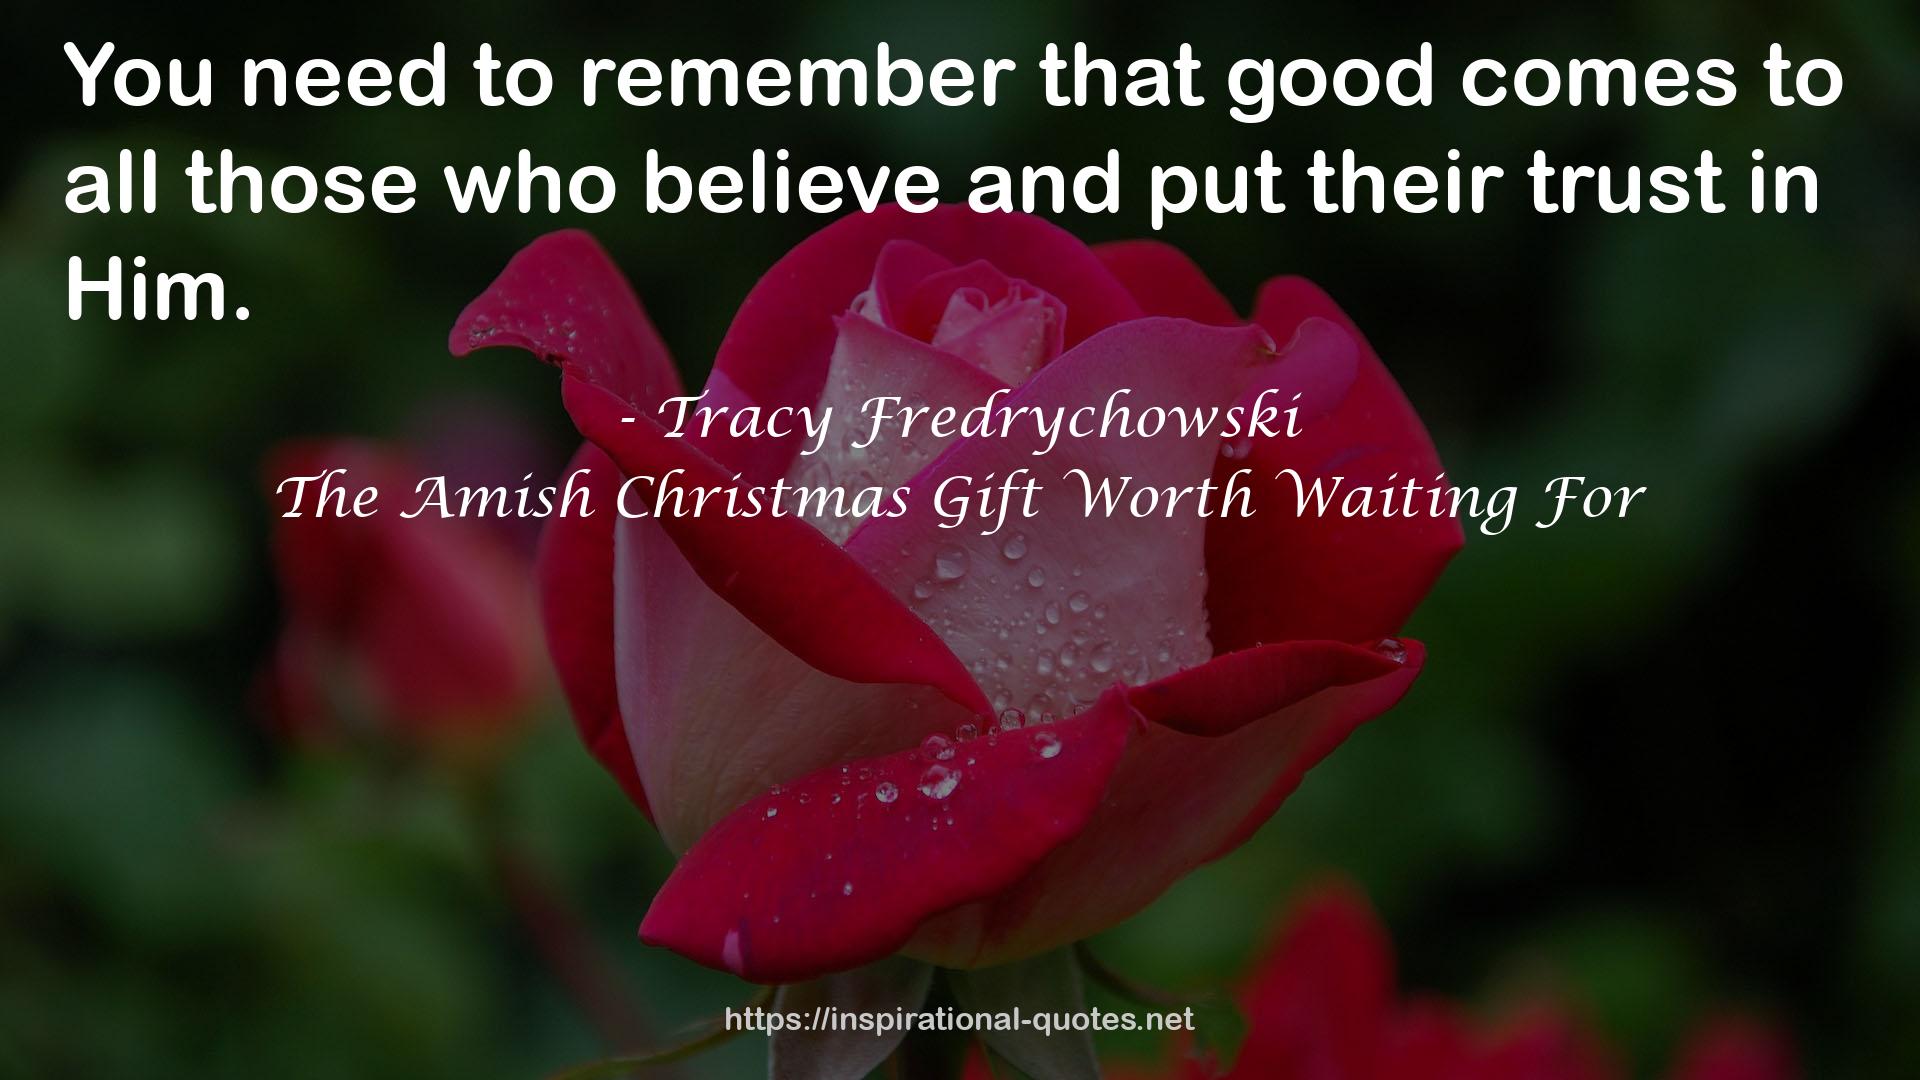 The Amish Christmas Gift Worth Waiting For QUOTES